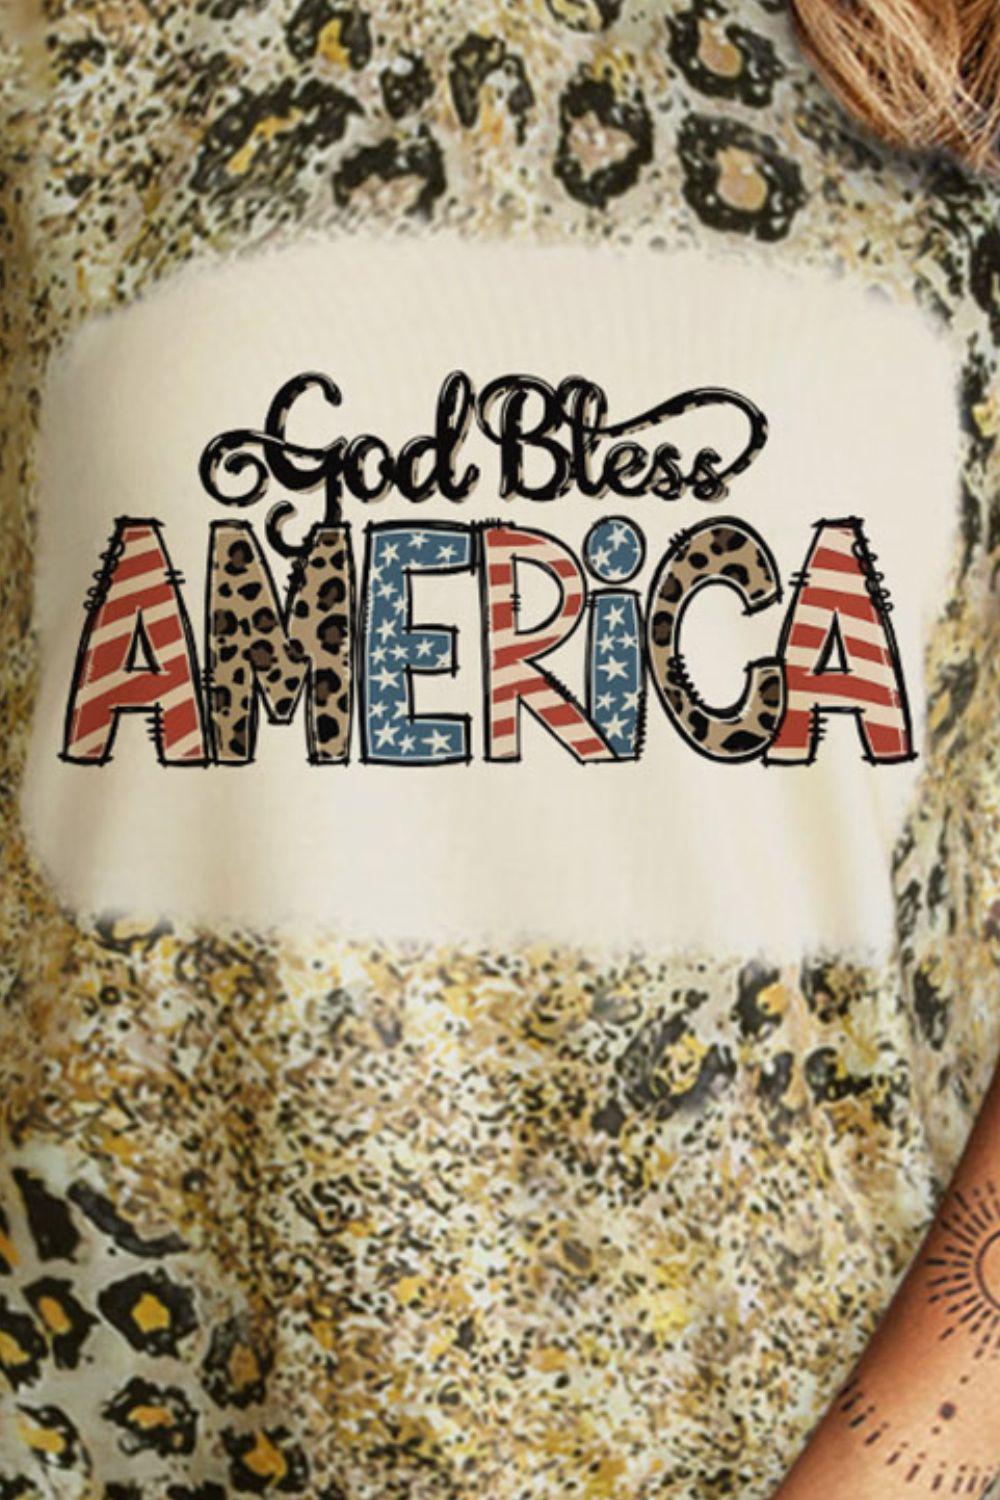 GOD BLESS AMERICA Graphic Leopard Tank BLUE ZONE PLANET